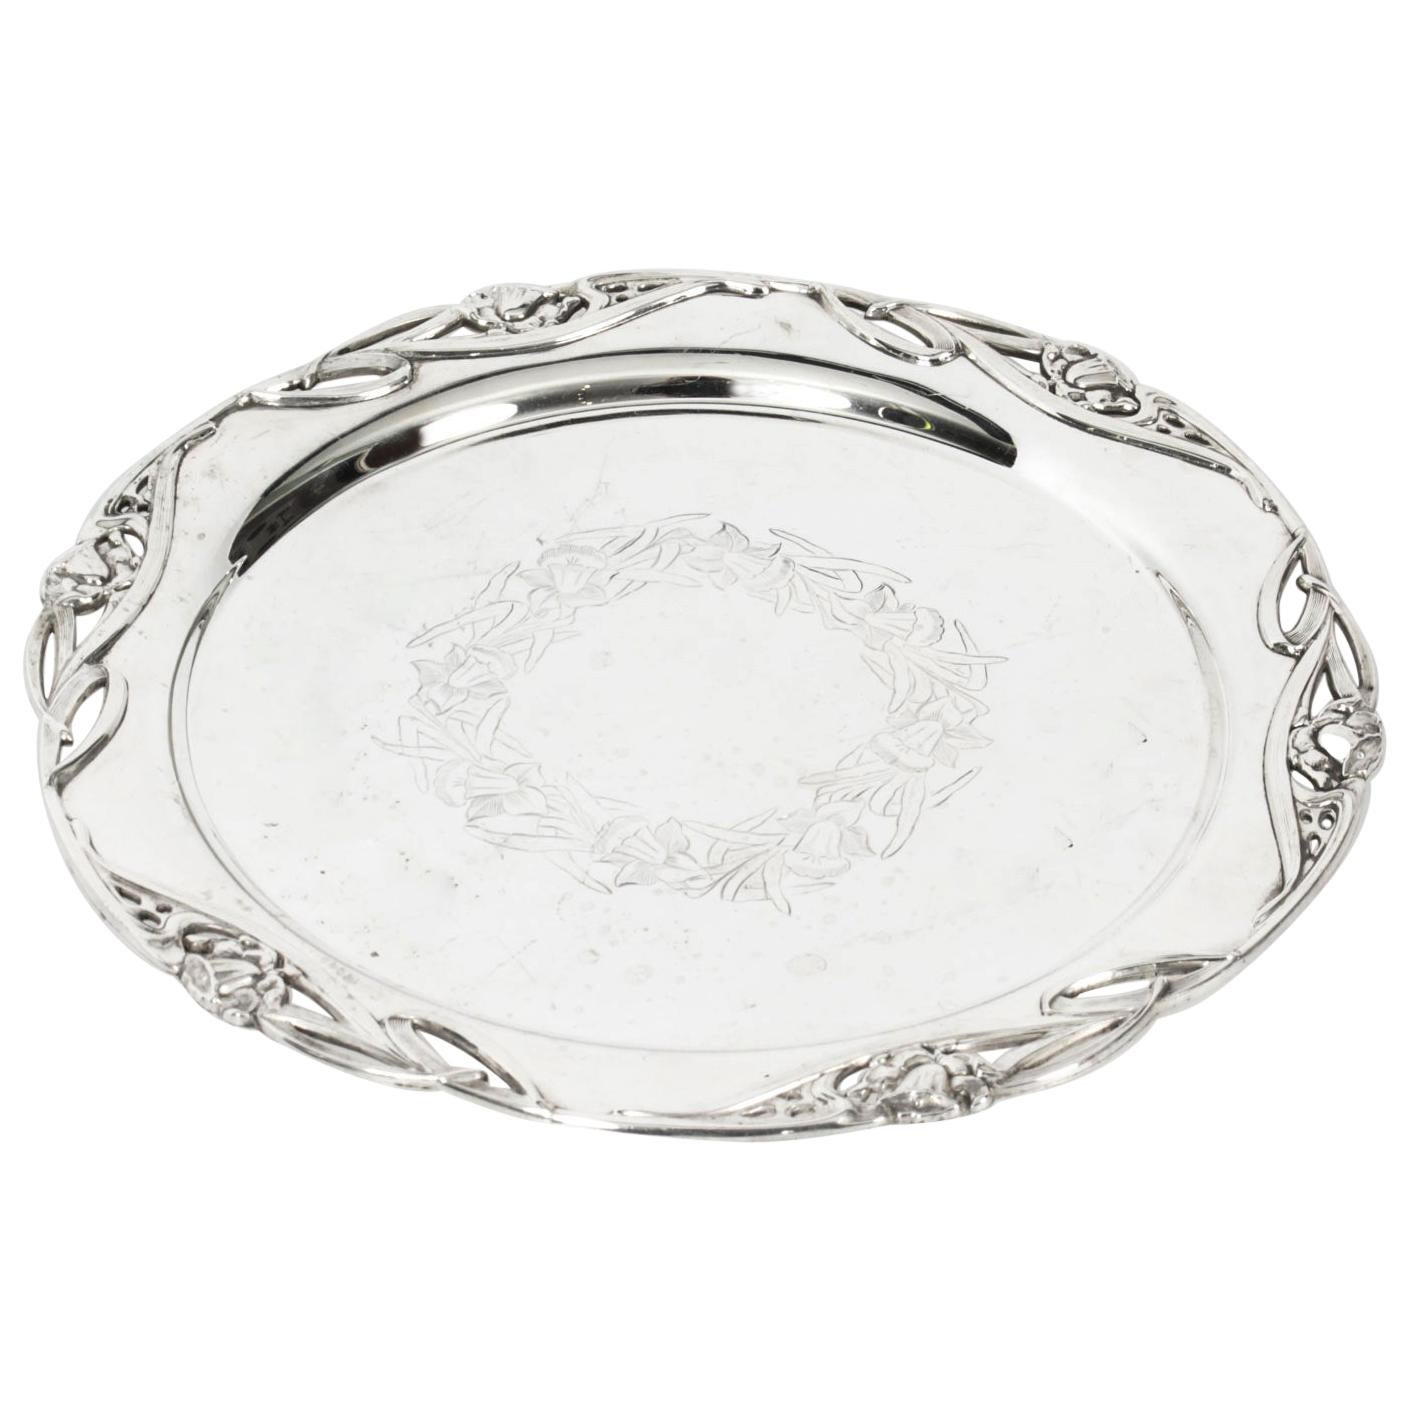 Antique Silver Plated Salver by William Hutton & Son, 19th C